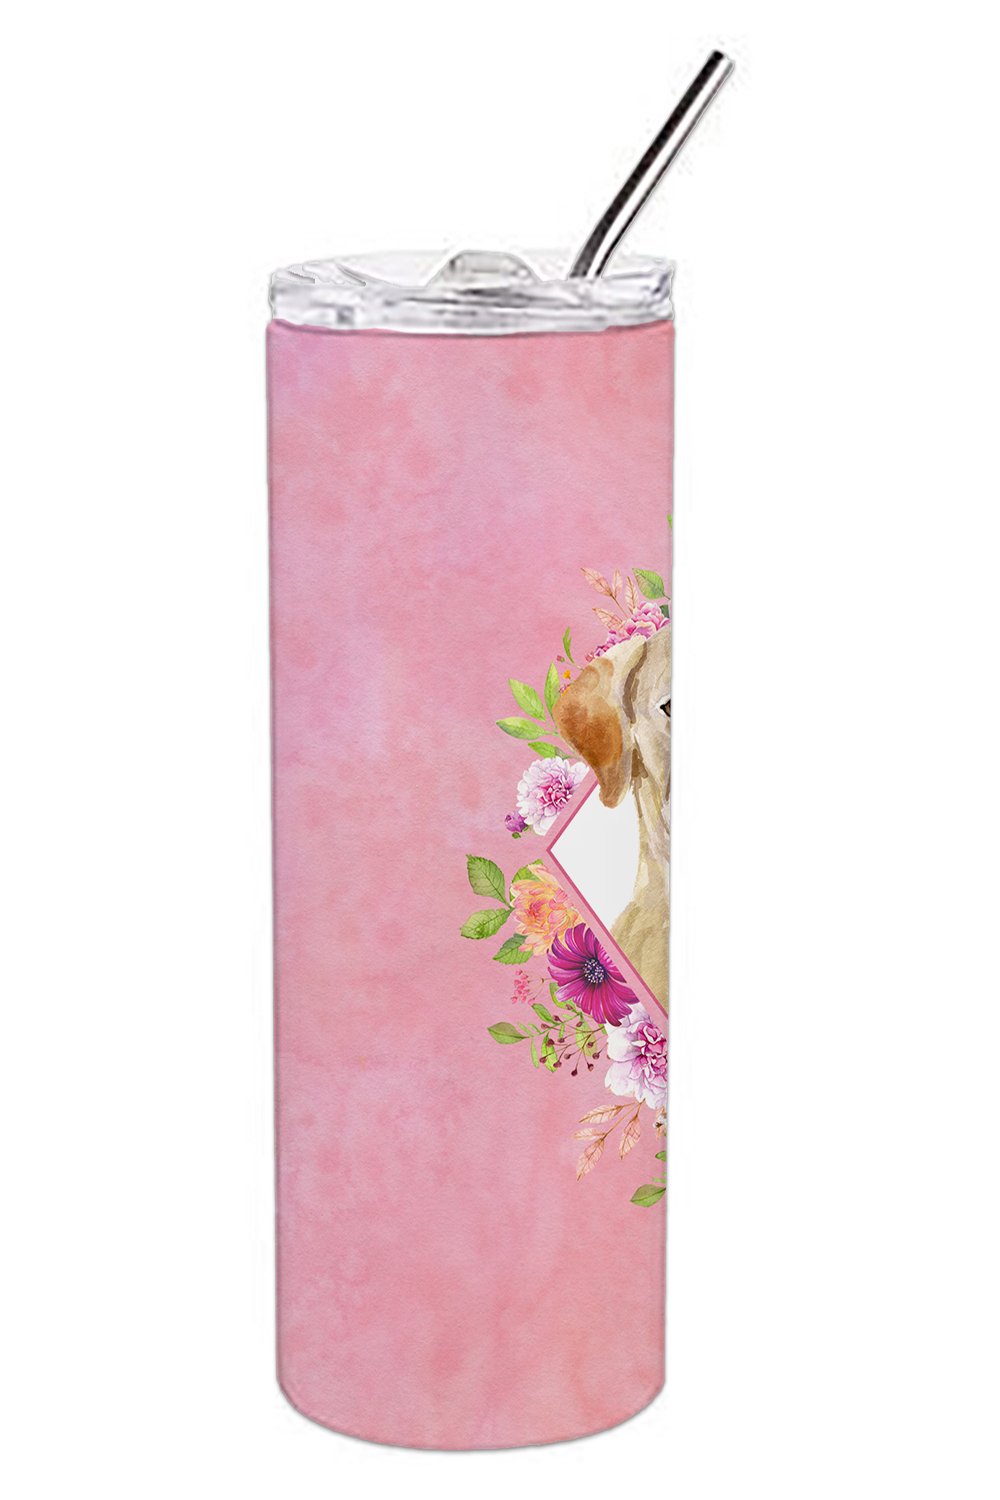 Yellow Lab Pink Flowers Double Walled Stainless Steel 20 oz Skinny Tumbler CK4227TBL20 by Caroline's Treasures